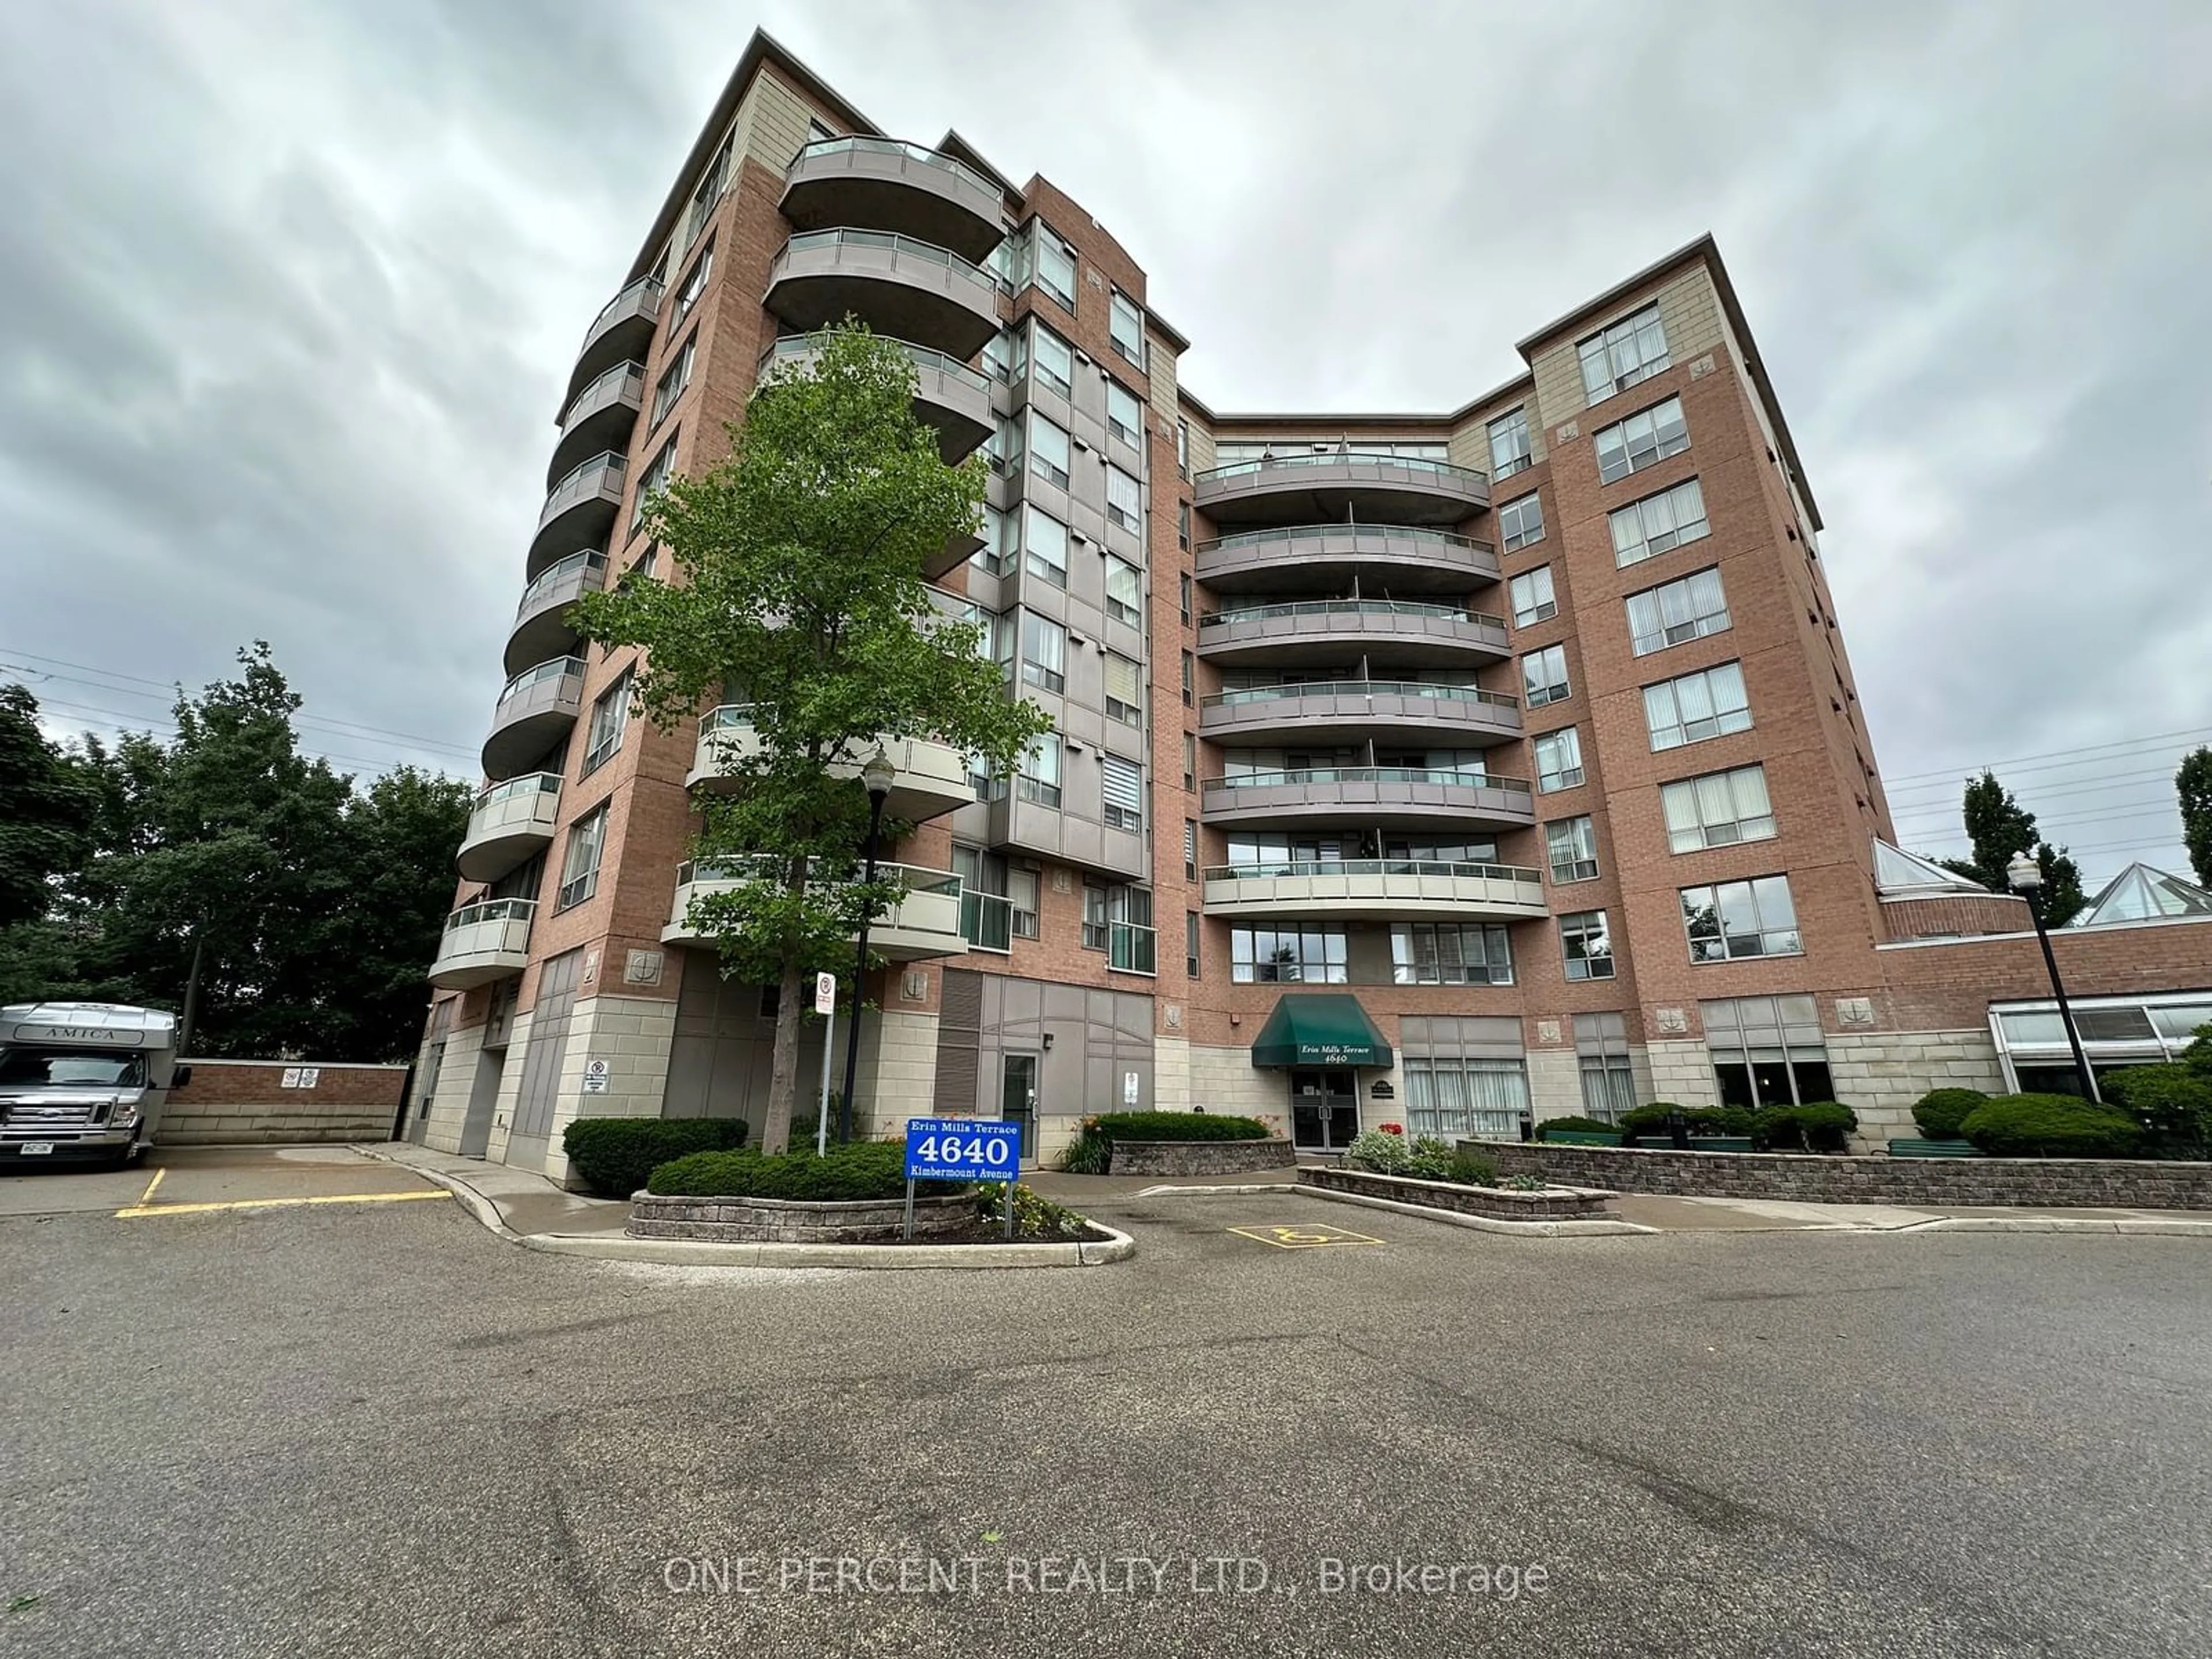 A pic from exterior of the house or condo for 4640 Kimbermount Ave #103, Mississauga Ontario L5M 5W6